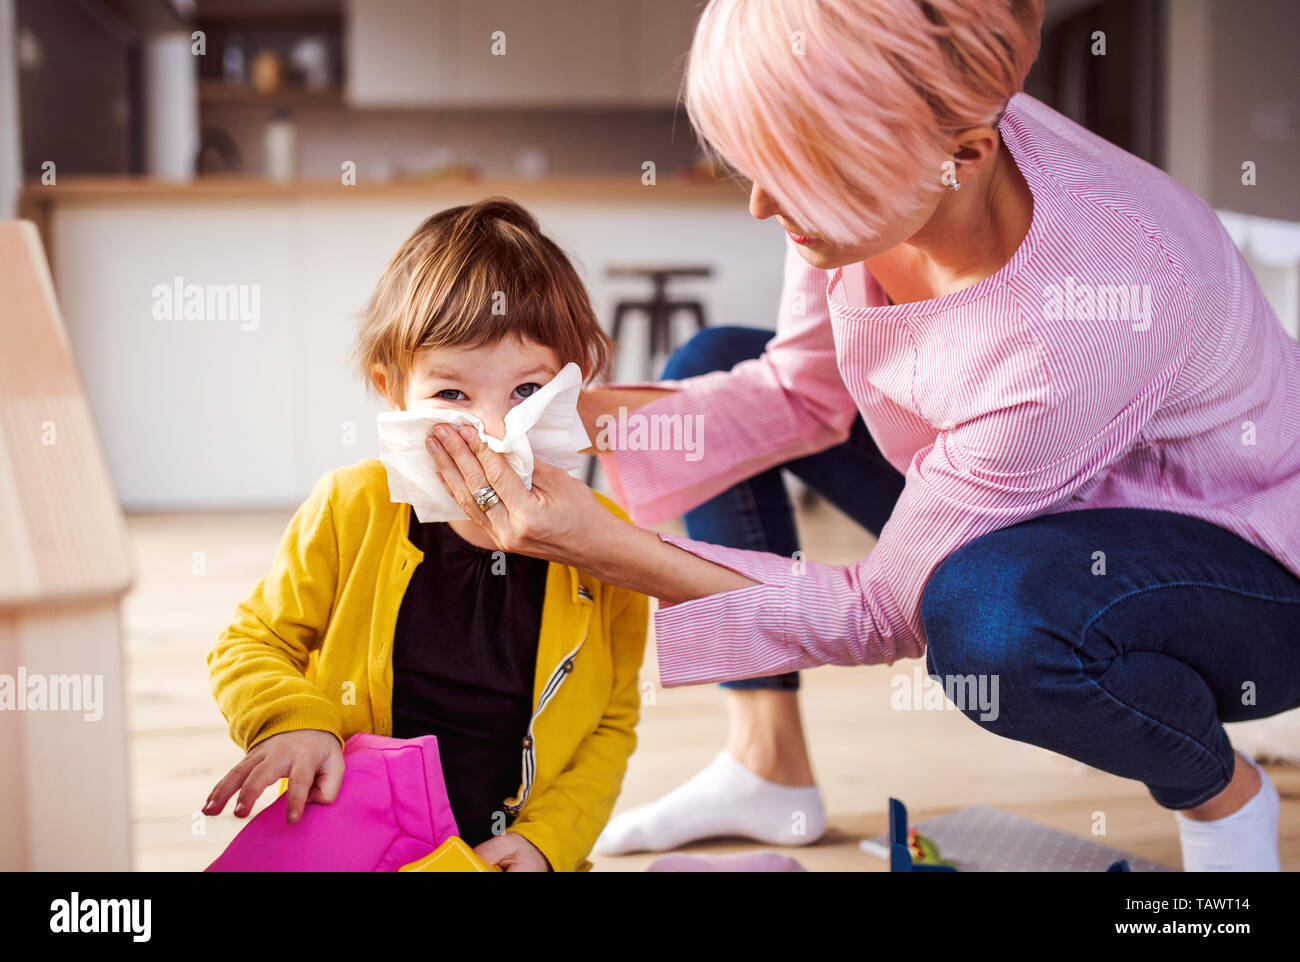 Mother blowing her small daughter's nose when playing at home. Stock Photo